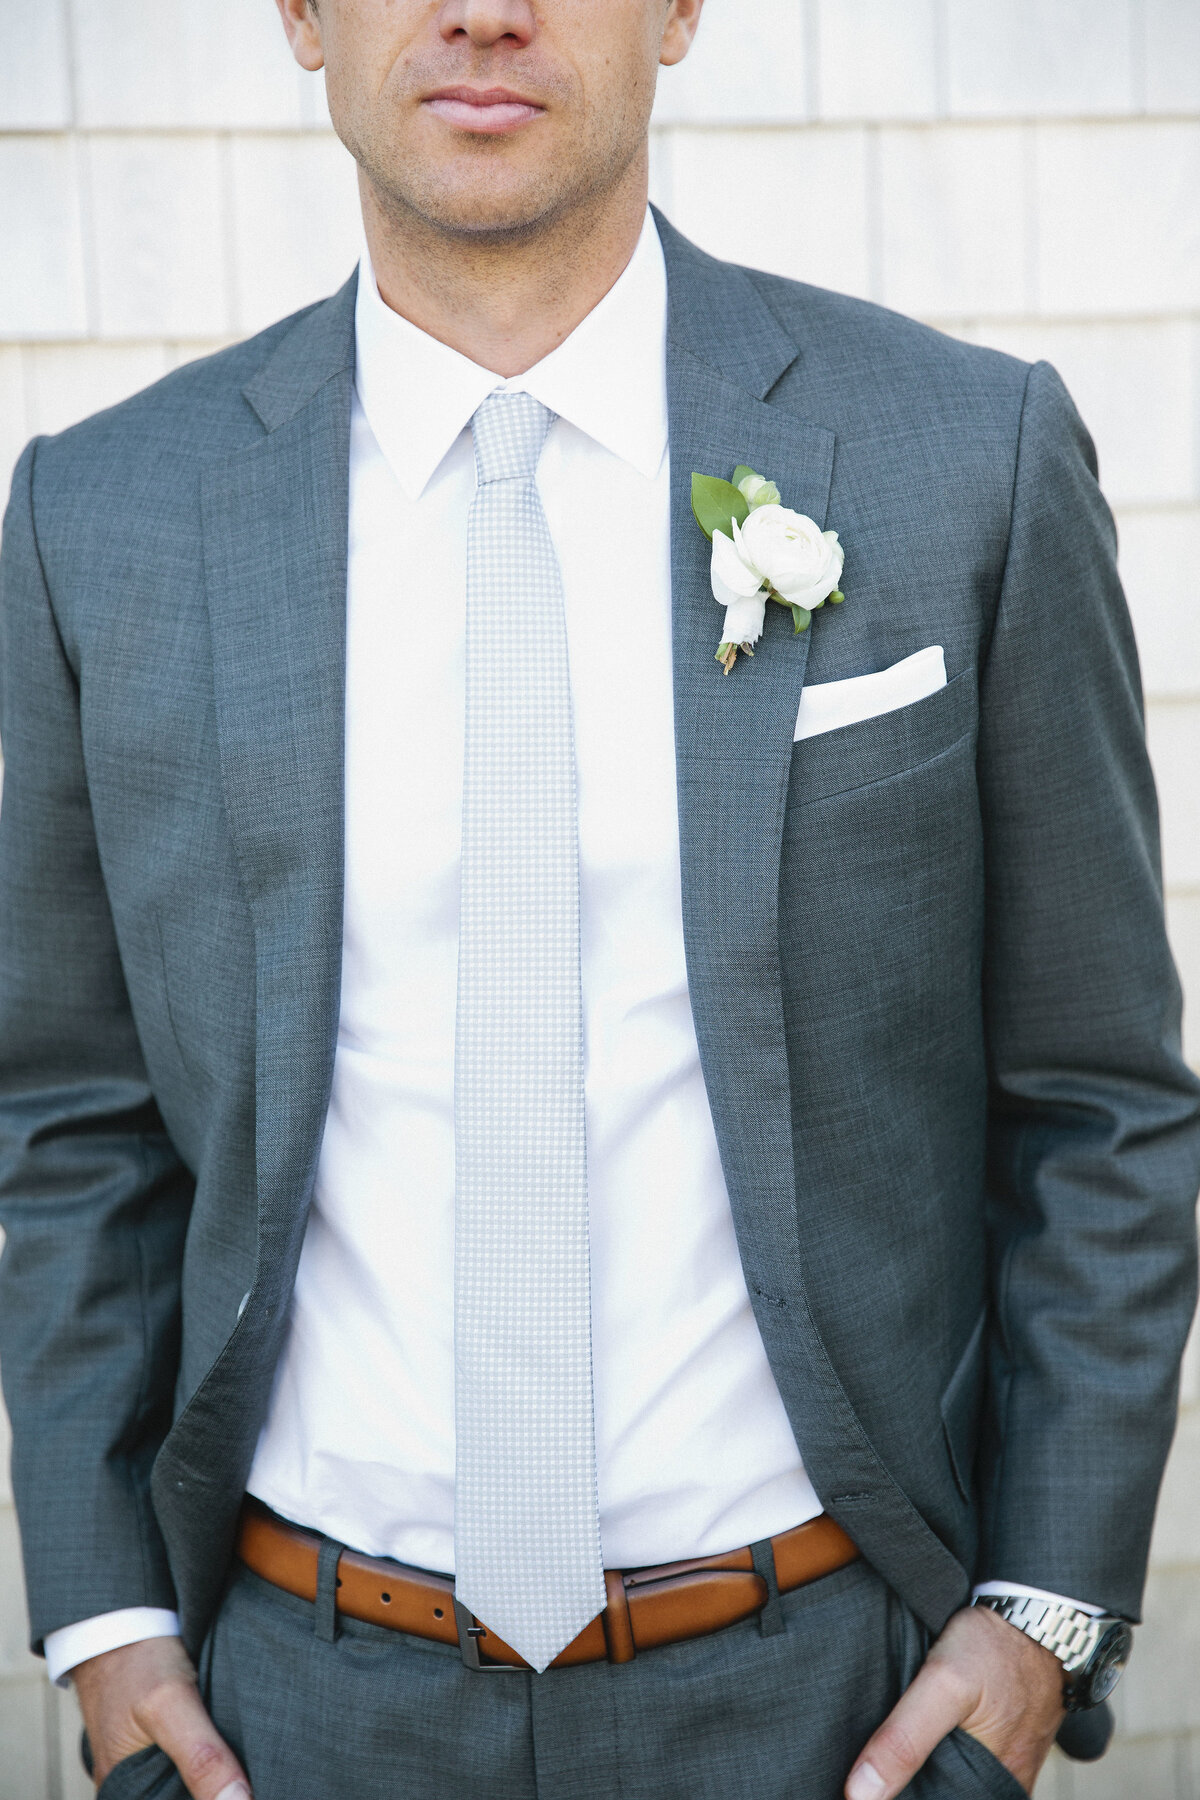 Gray custom suit and white boutonniere for groom on Cape Cod